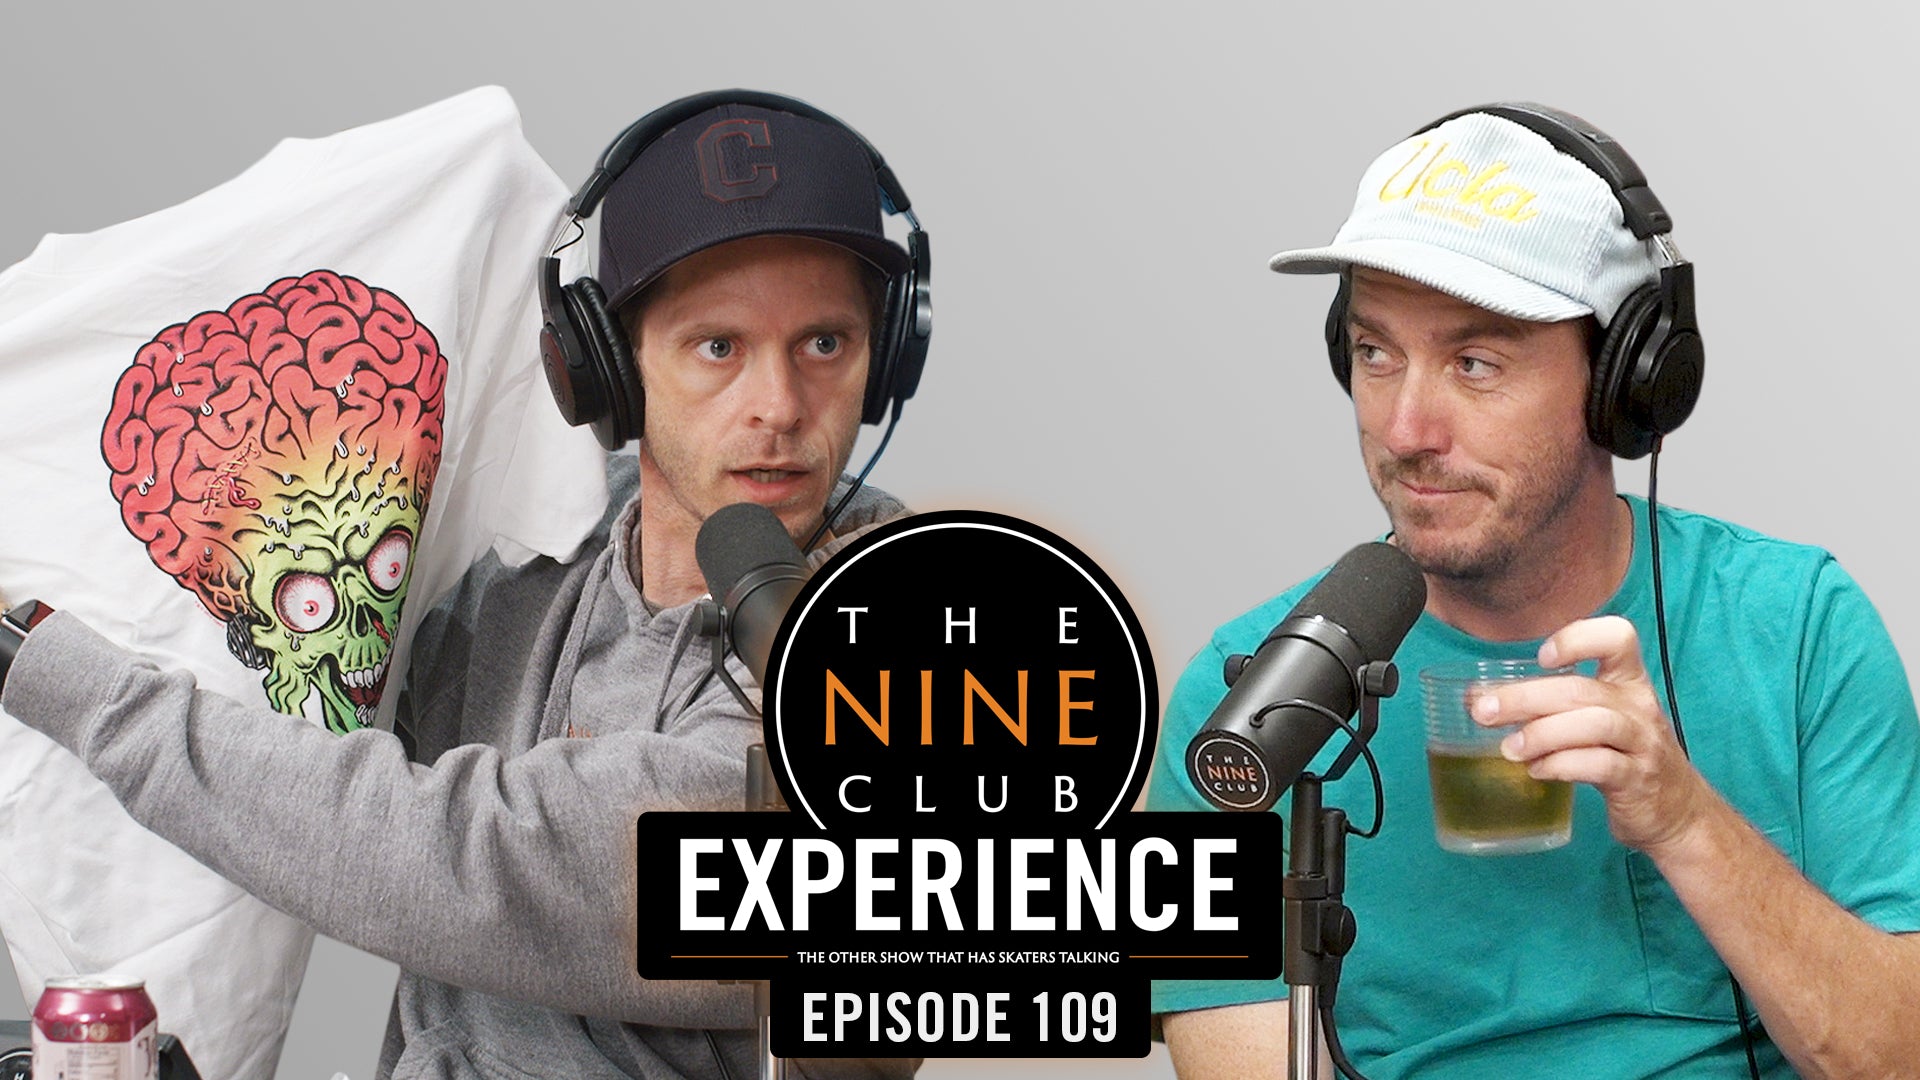 The Nine Club Experience Episode 109